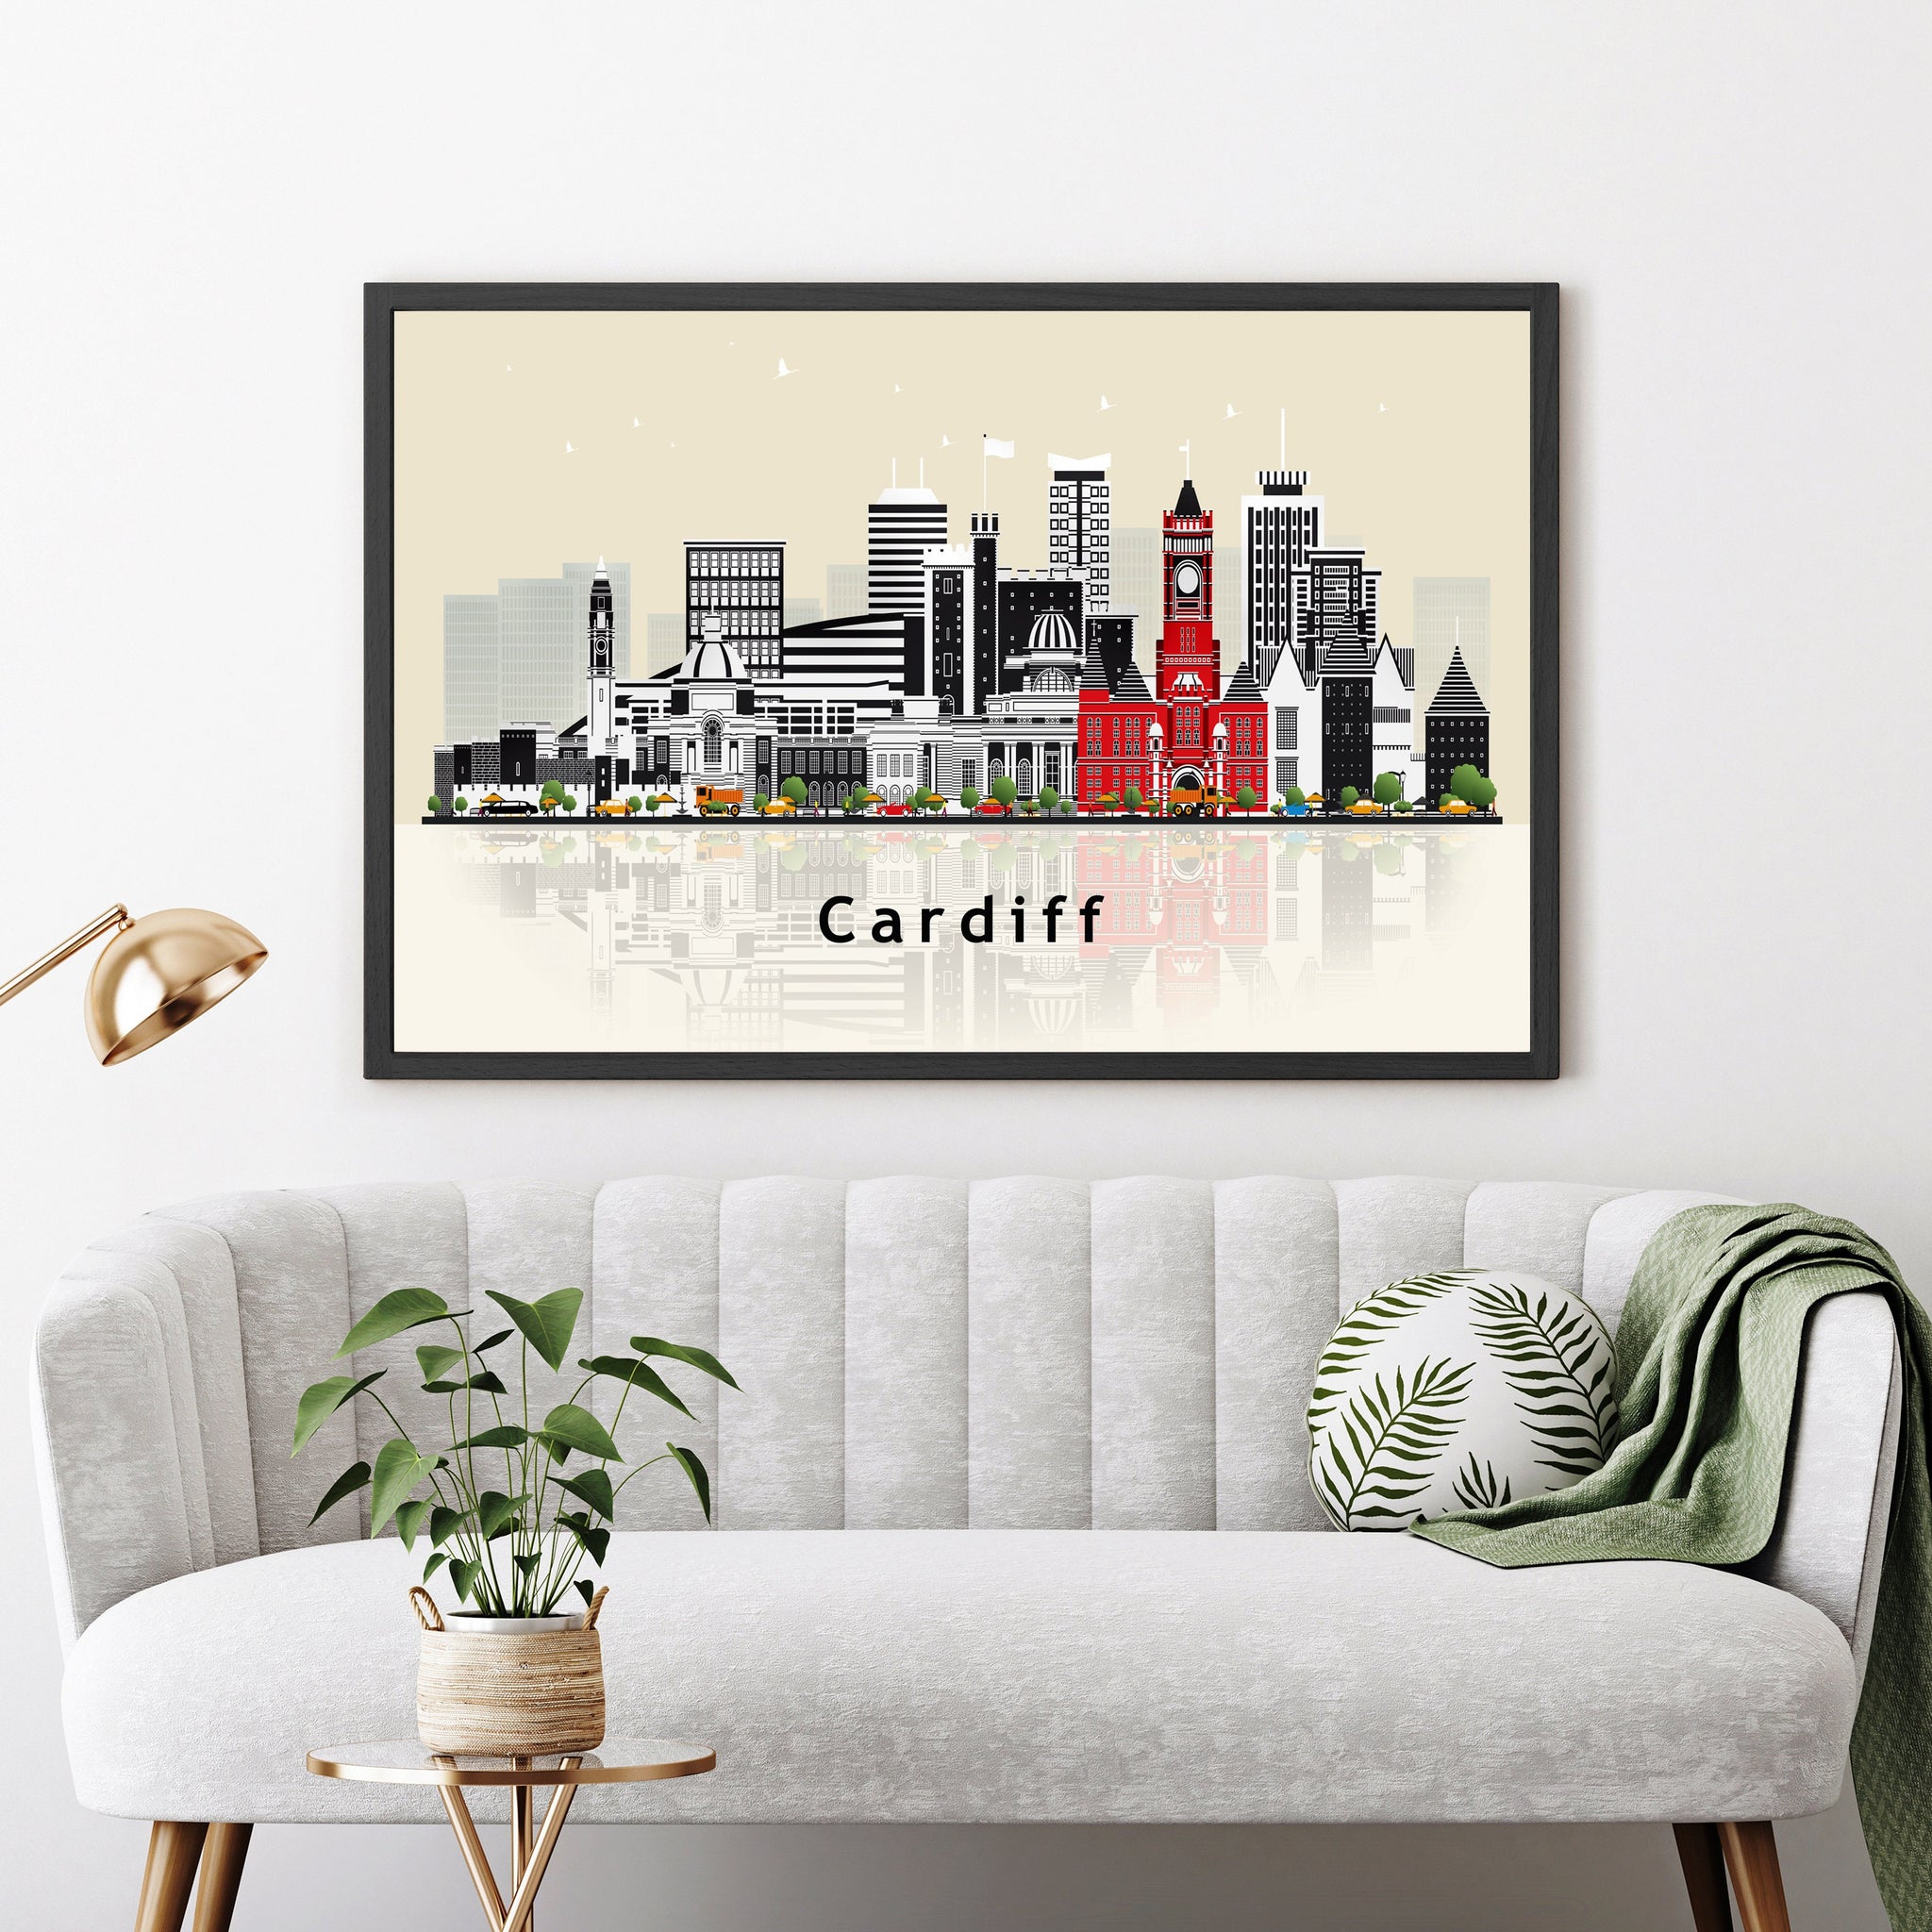 CARDIFF WALES Illustration skyline poster, Cardiff modern skyline cityscape poster print, Wales landmark map poster, Home wall decoration